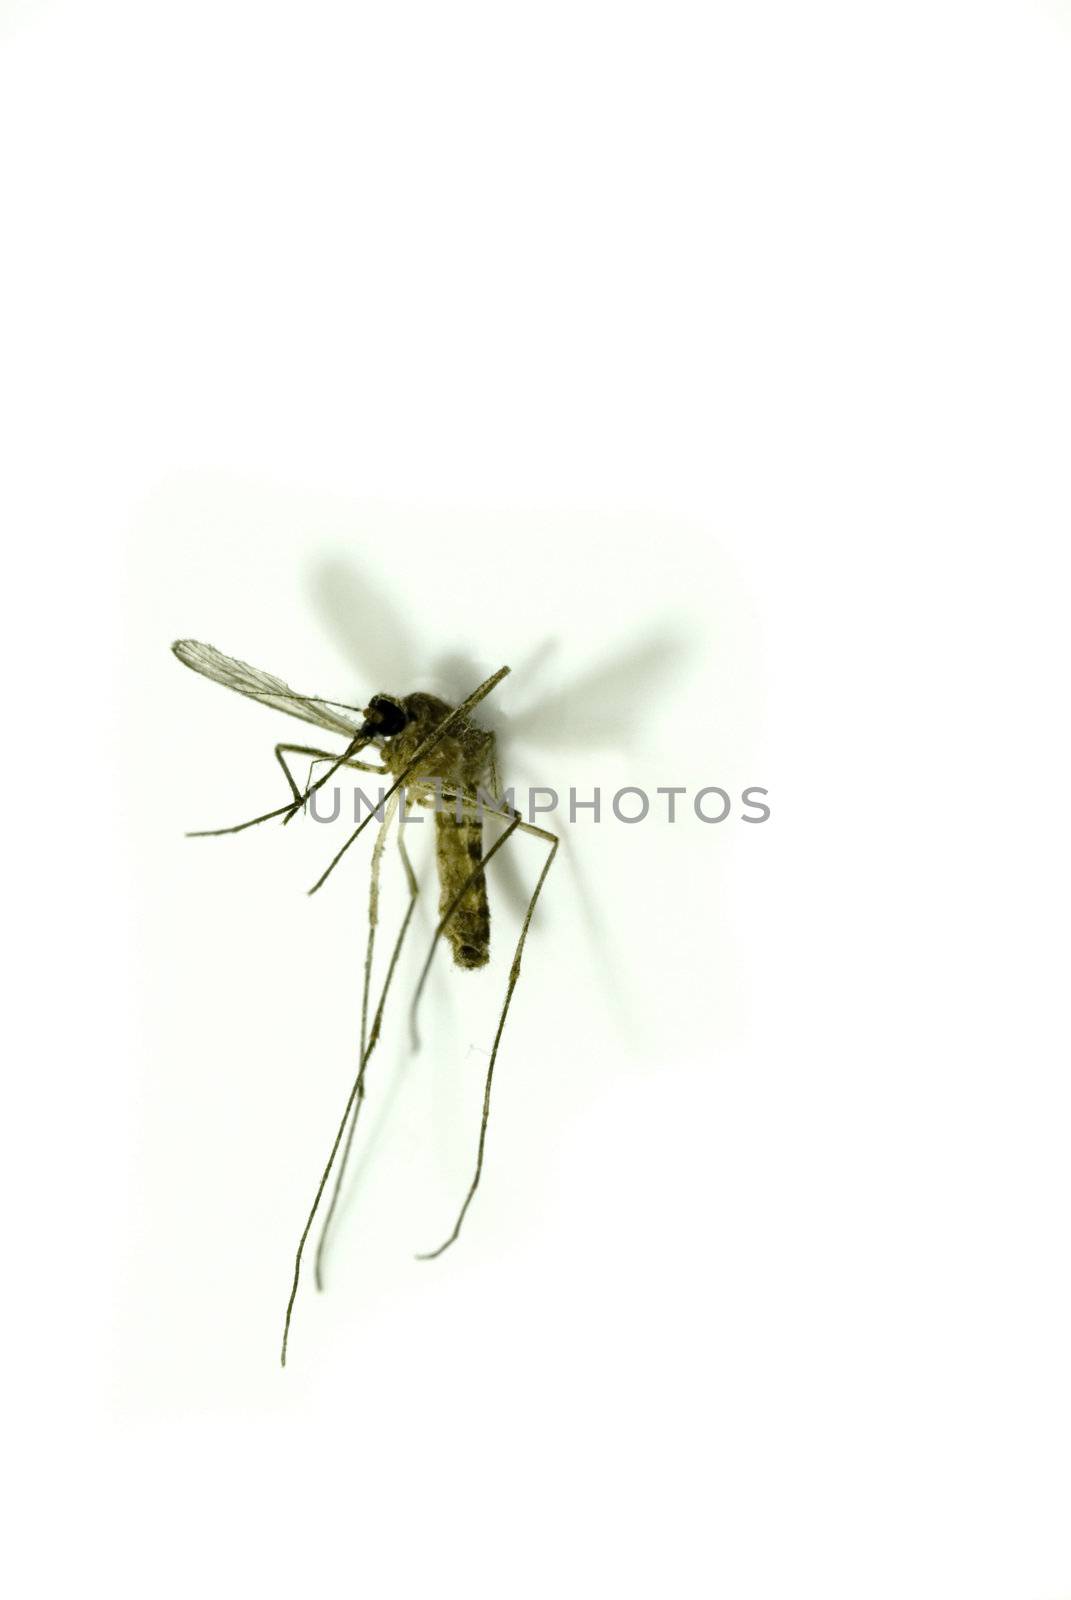 mosquito by stockarch